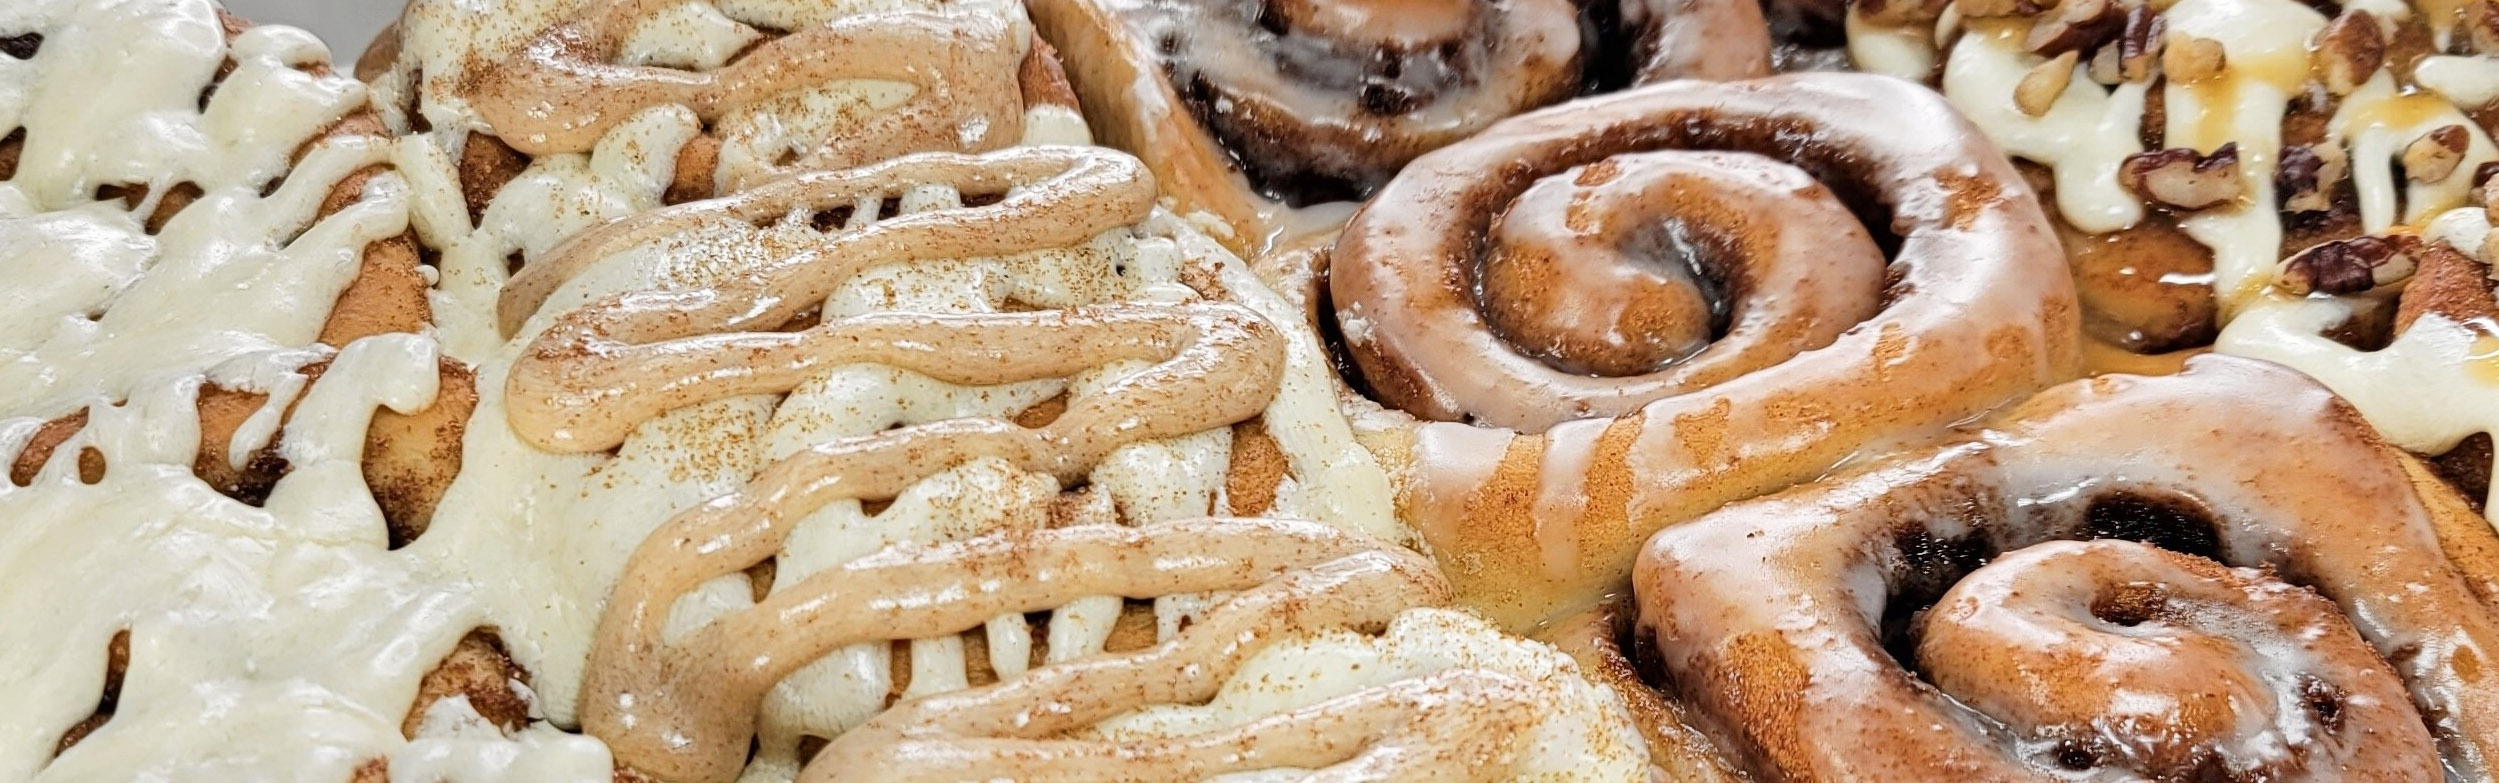 A tray of cinnamon rolls decorated with different icing including cinnamon, buttercream and pecan.